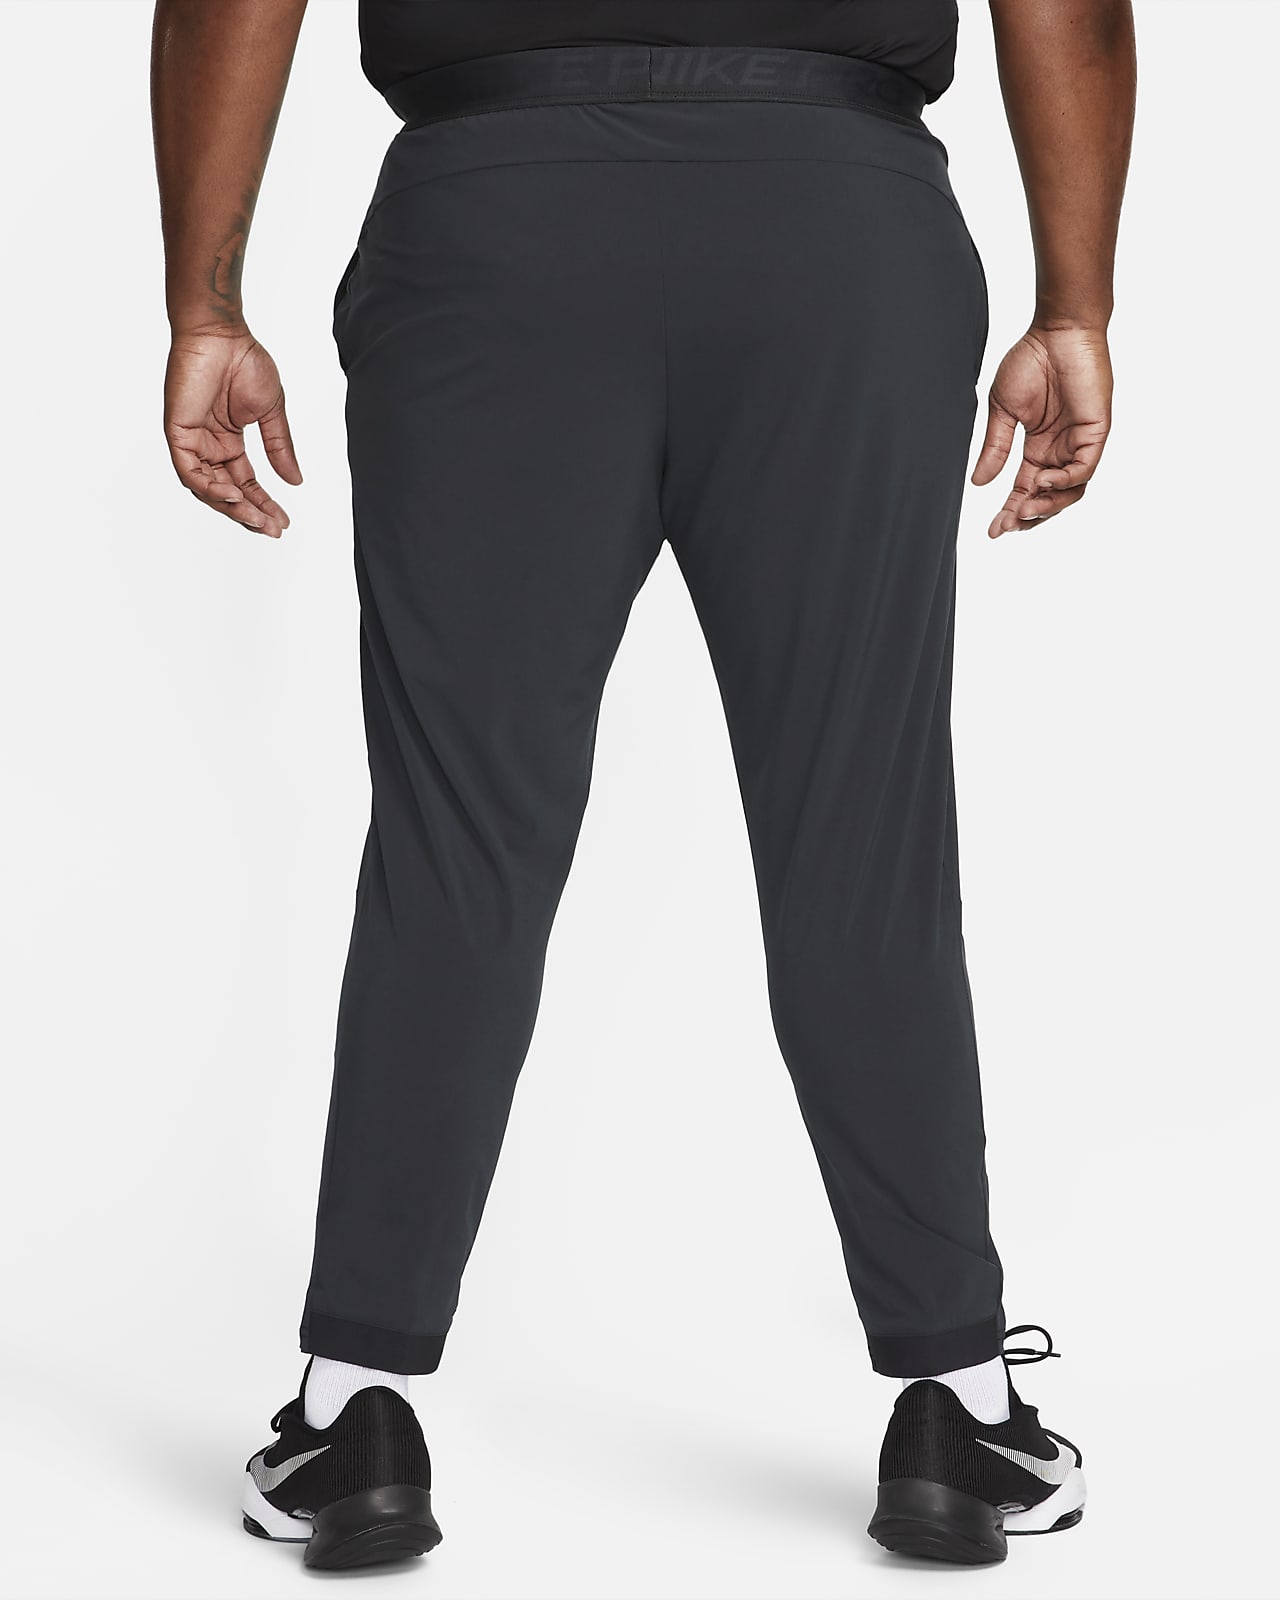 Nike Gray Active Pants Size XL - 39% off